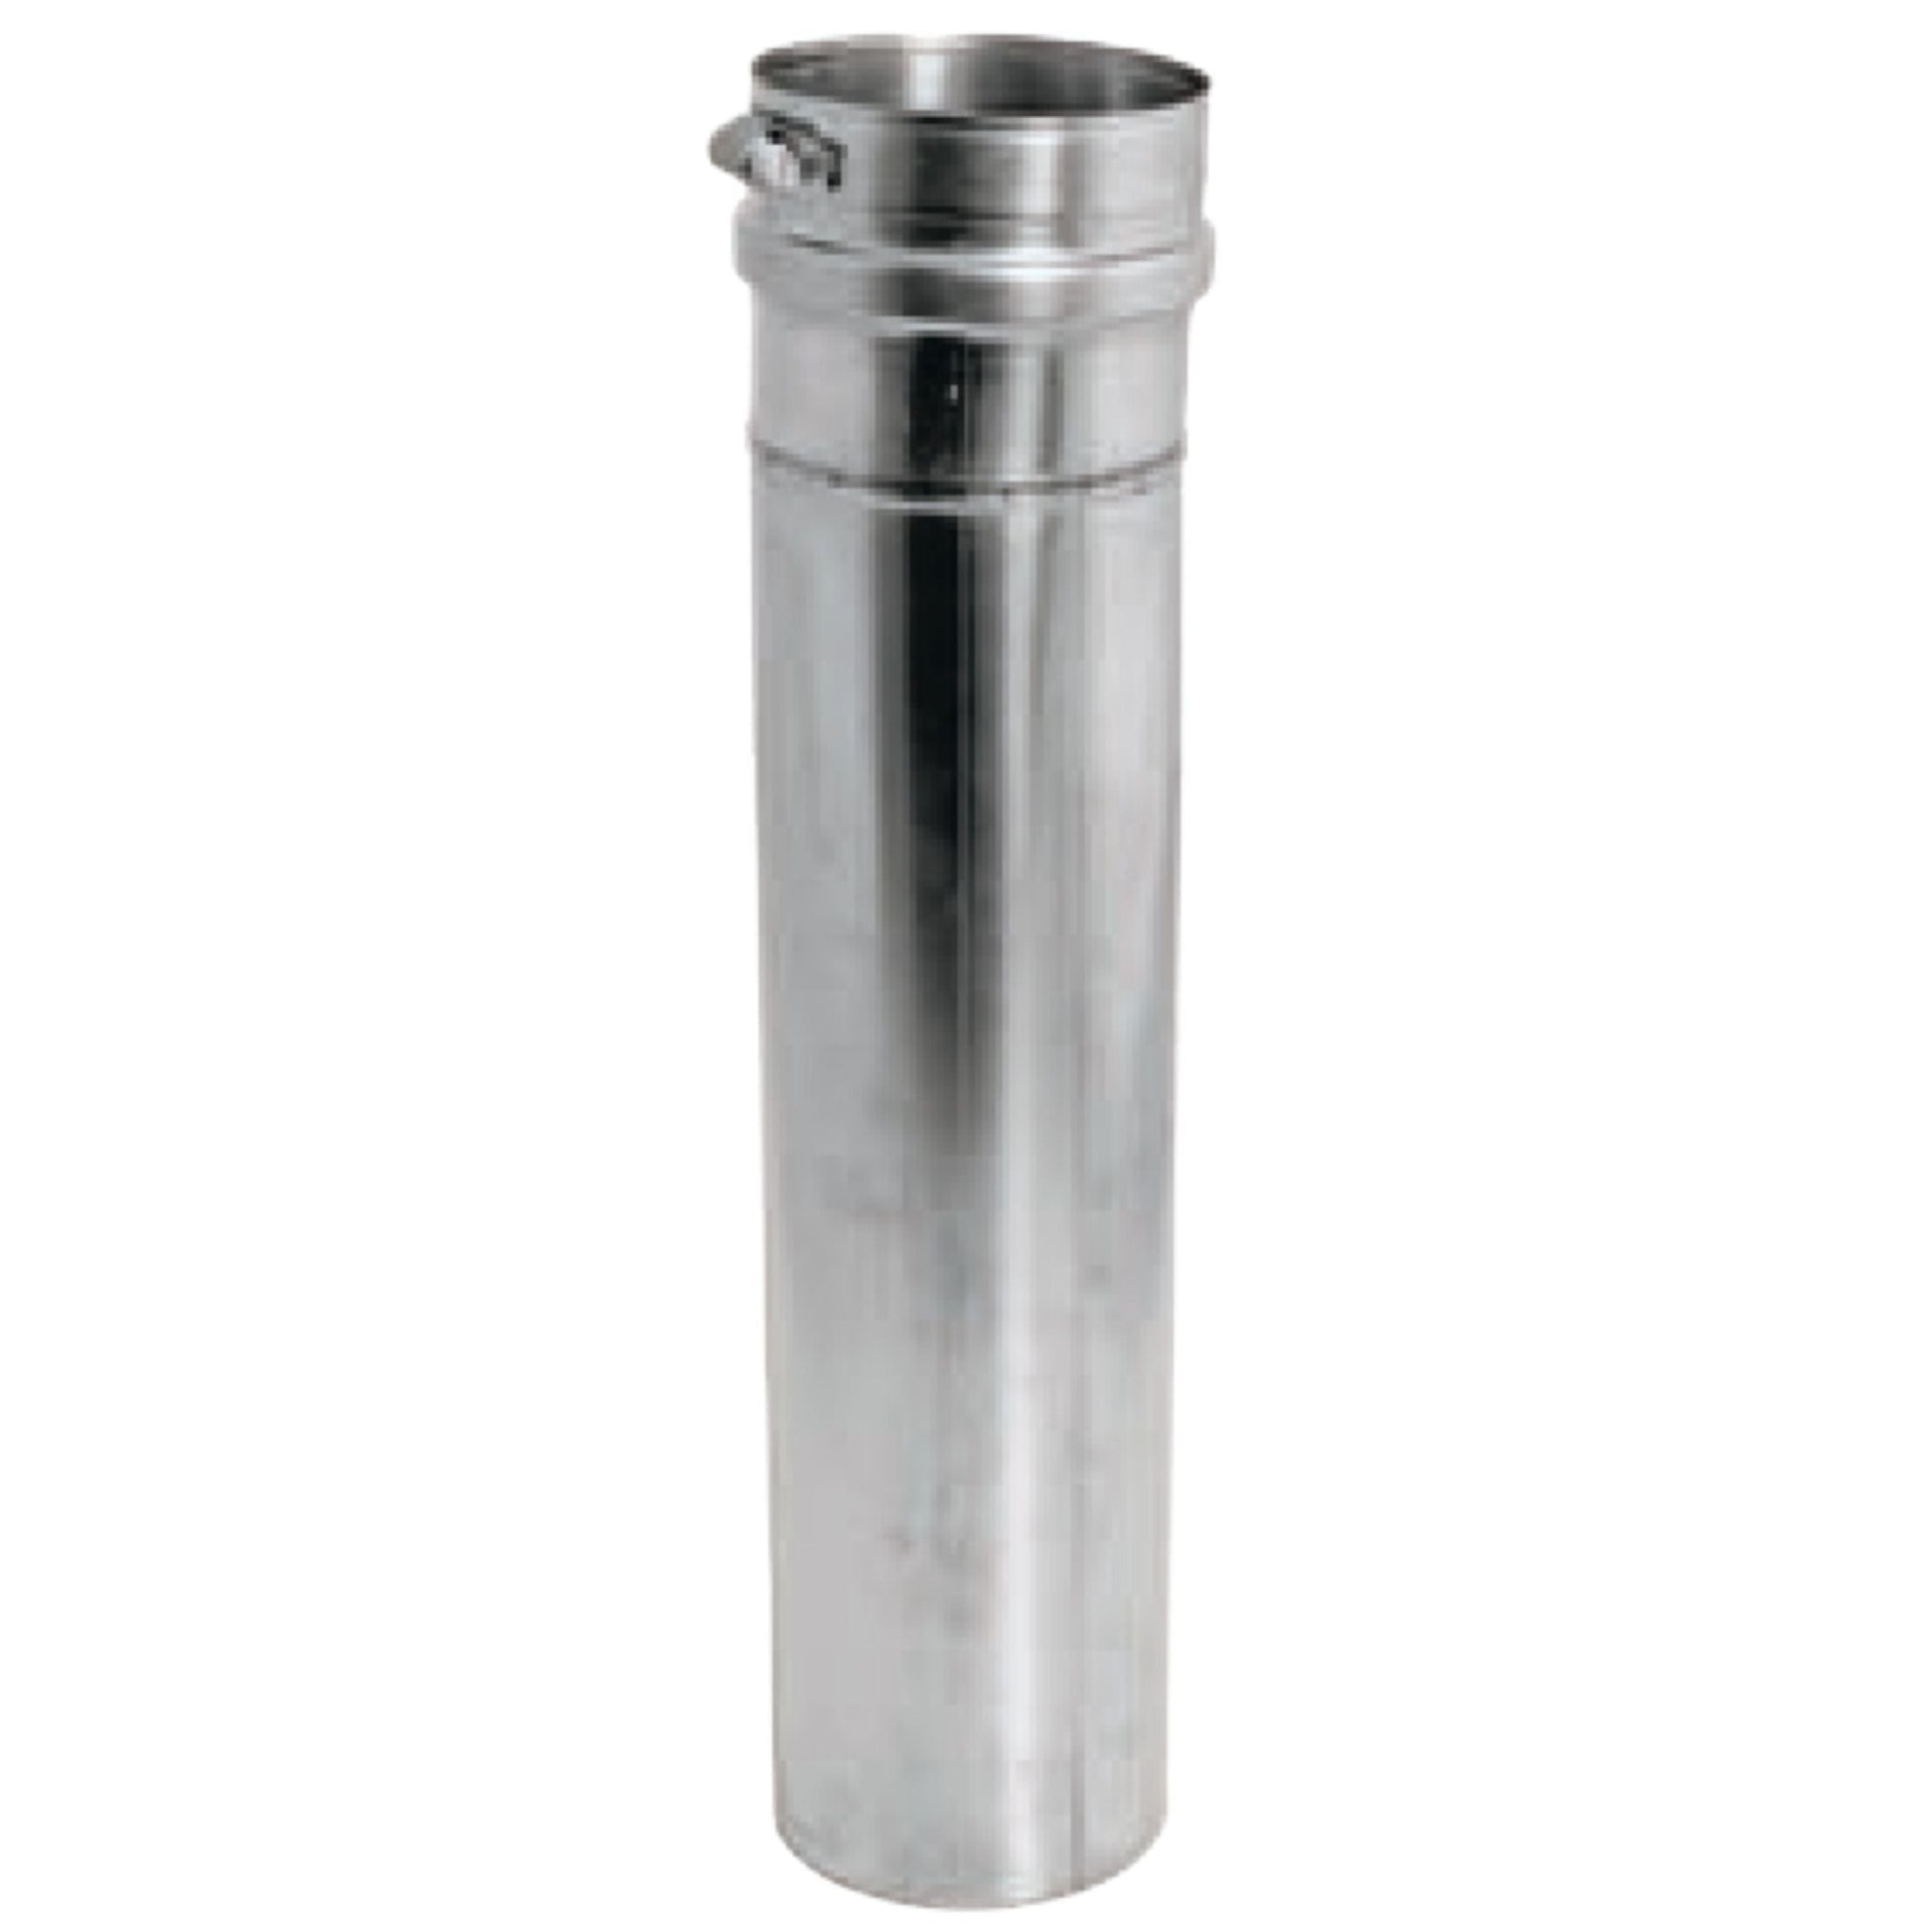 DuraVent FasNSeal 7" 2 Degree 29-4C Stainless Steel Adjustable Vent Length